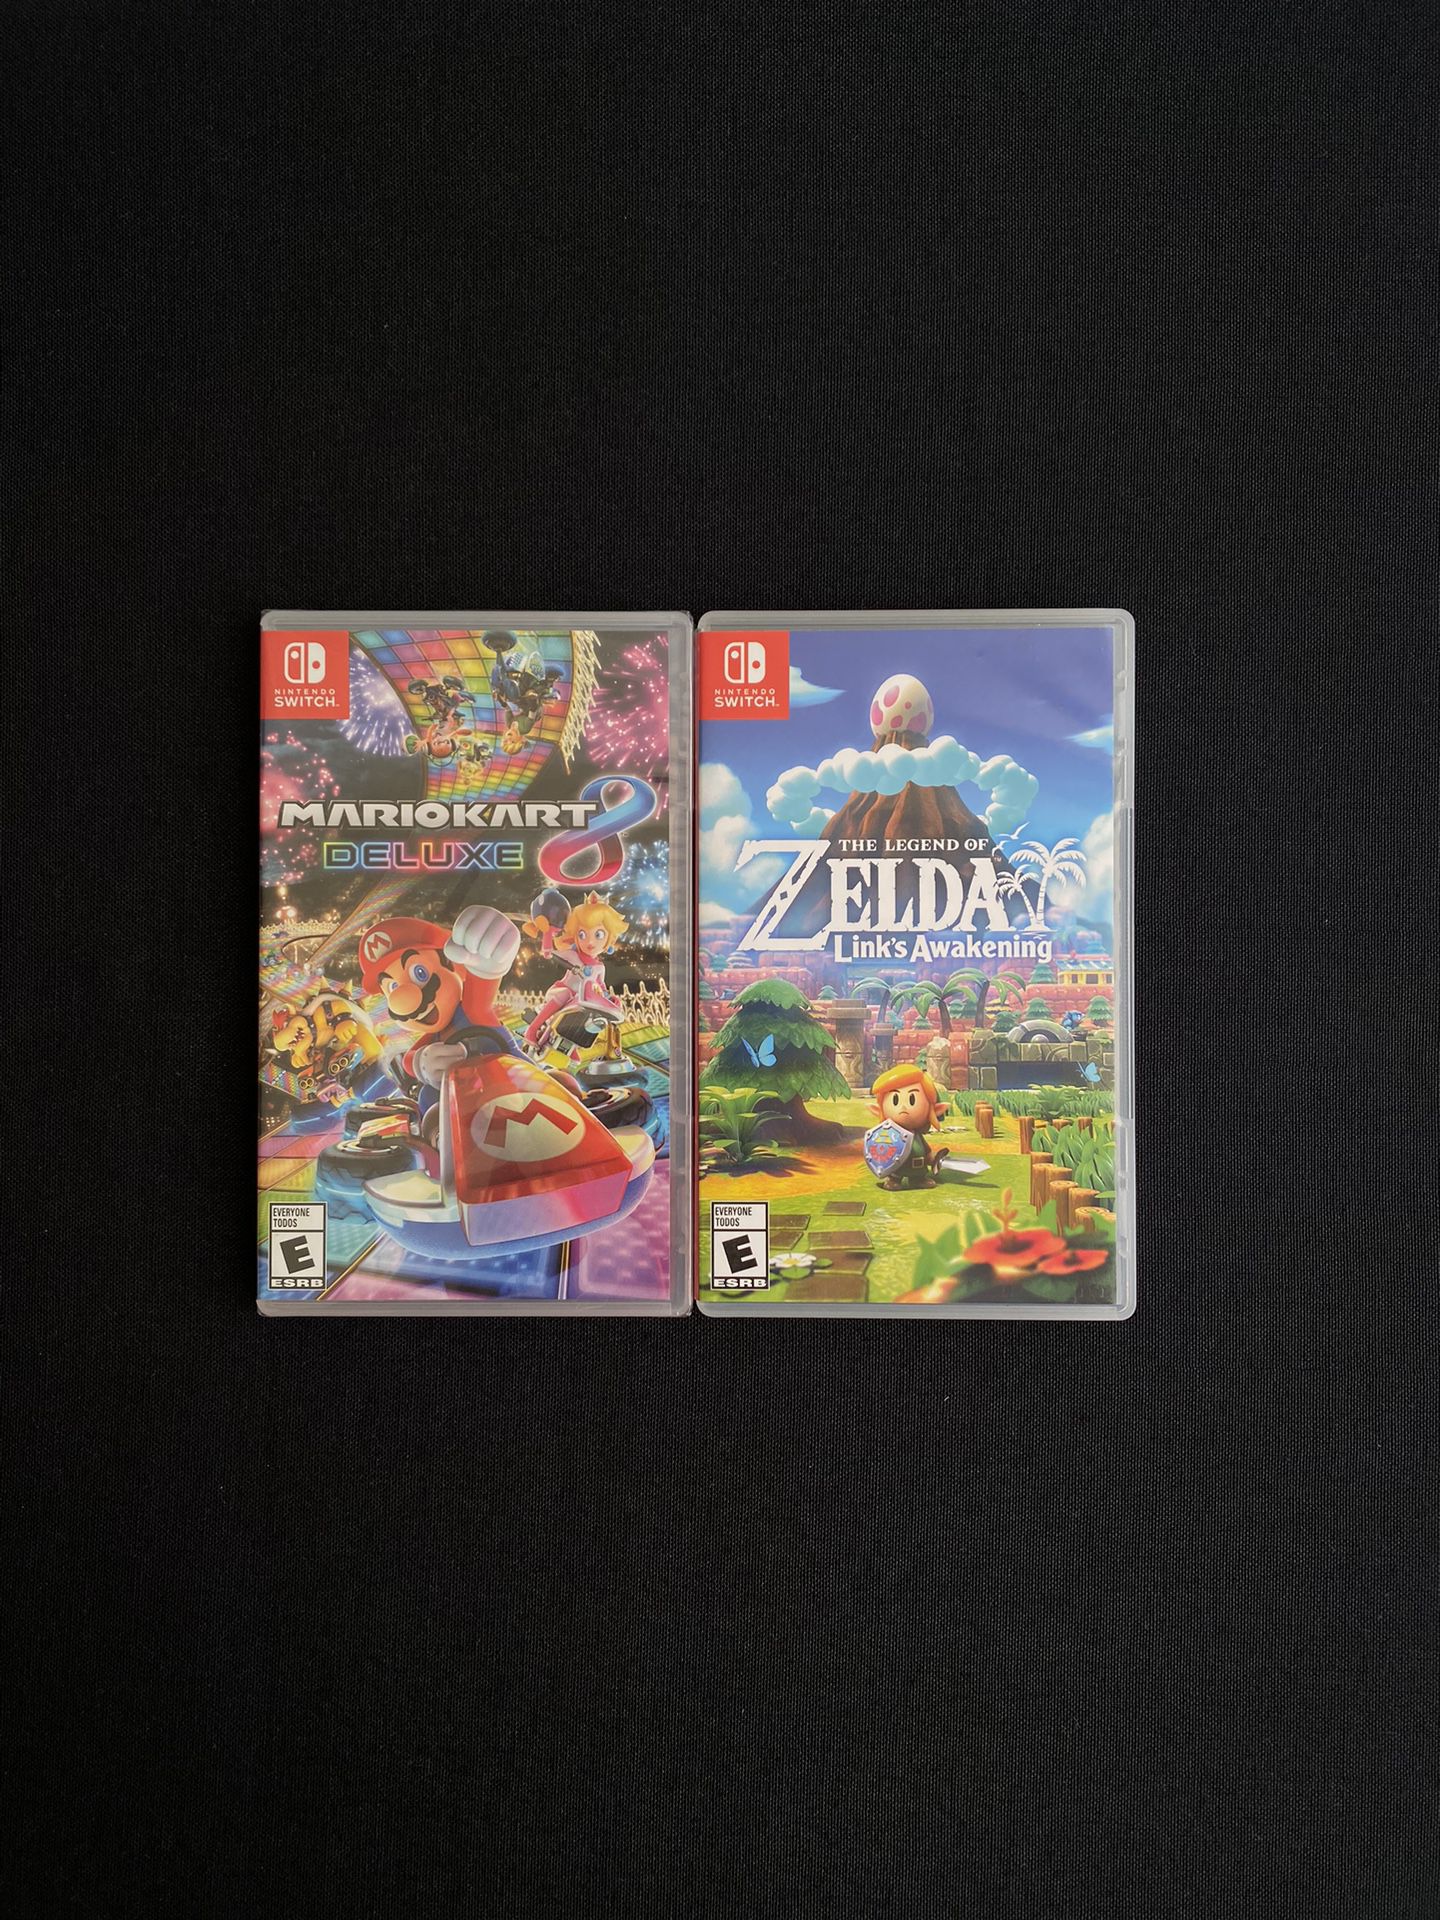 Nintendo Switch Games - Prices In The Description